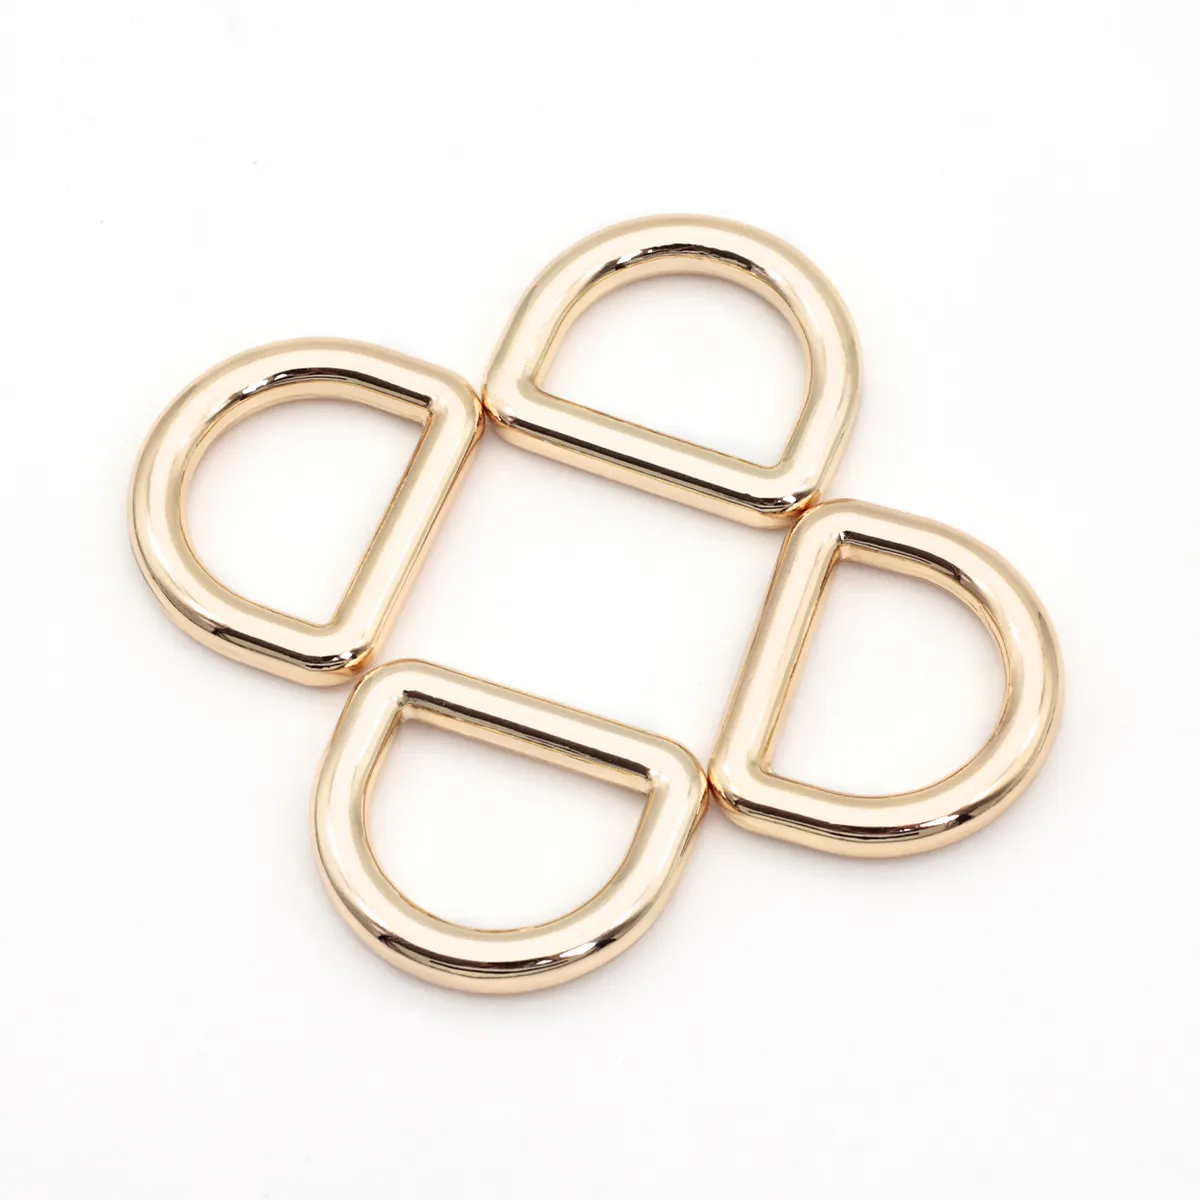 Trolley Bag Parts D Ring D Ring Buckle For Woman Handbag Purse Bags Accessories Bag Buckle Metal